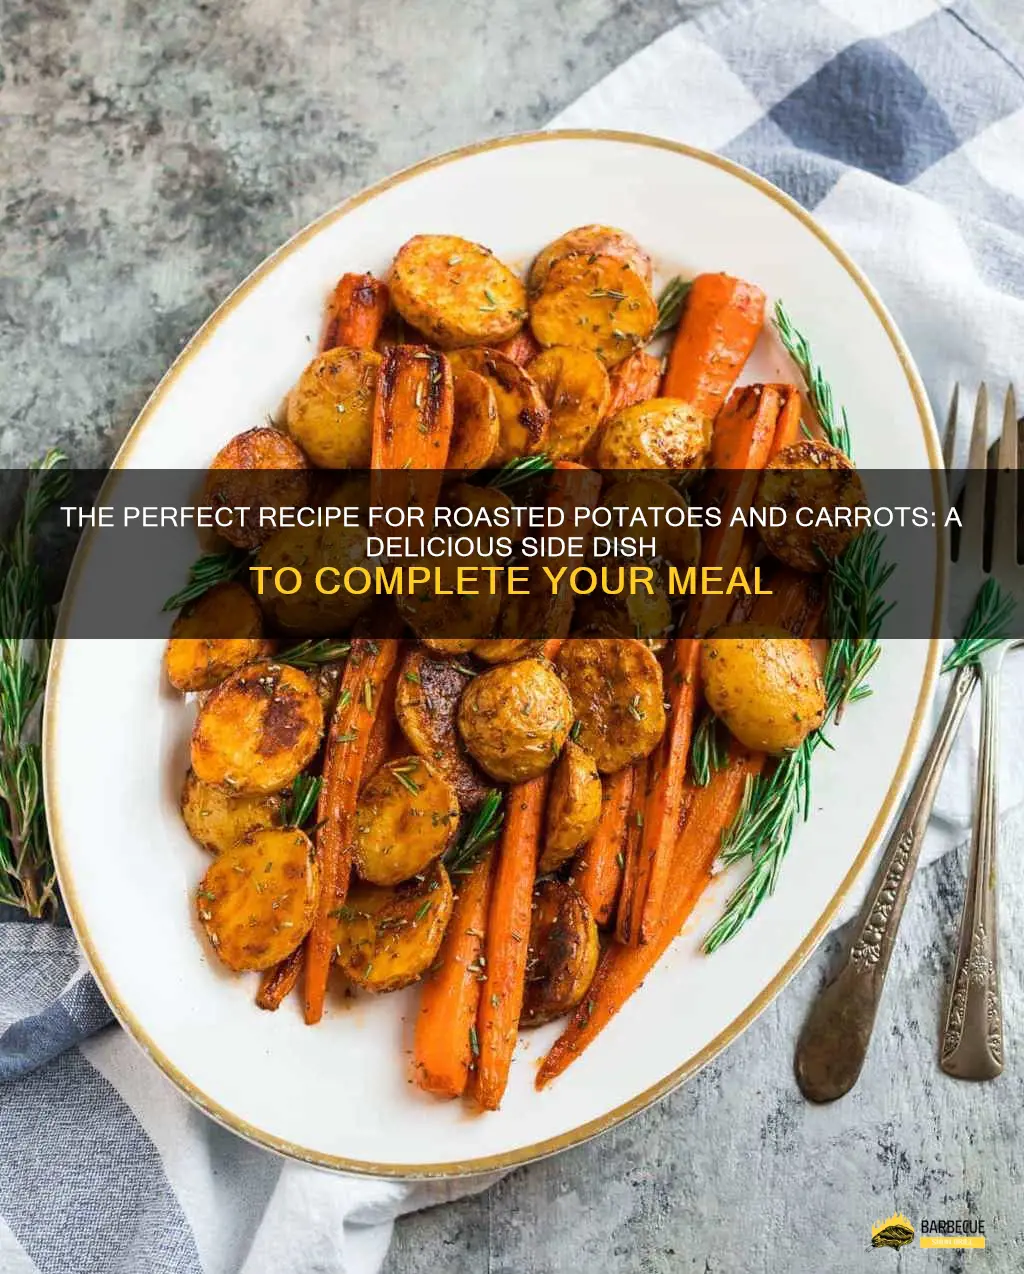 The Perfect Recipe For Roasted Potatoes And Carrots: A Delicious Side ...